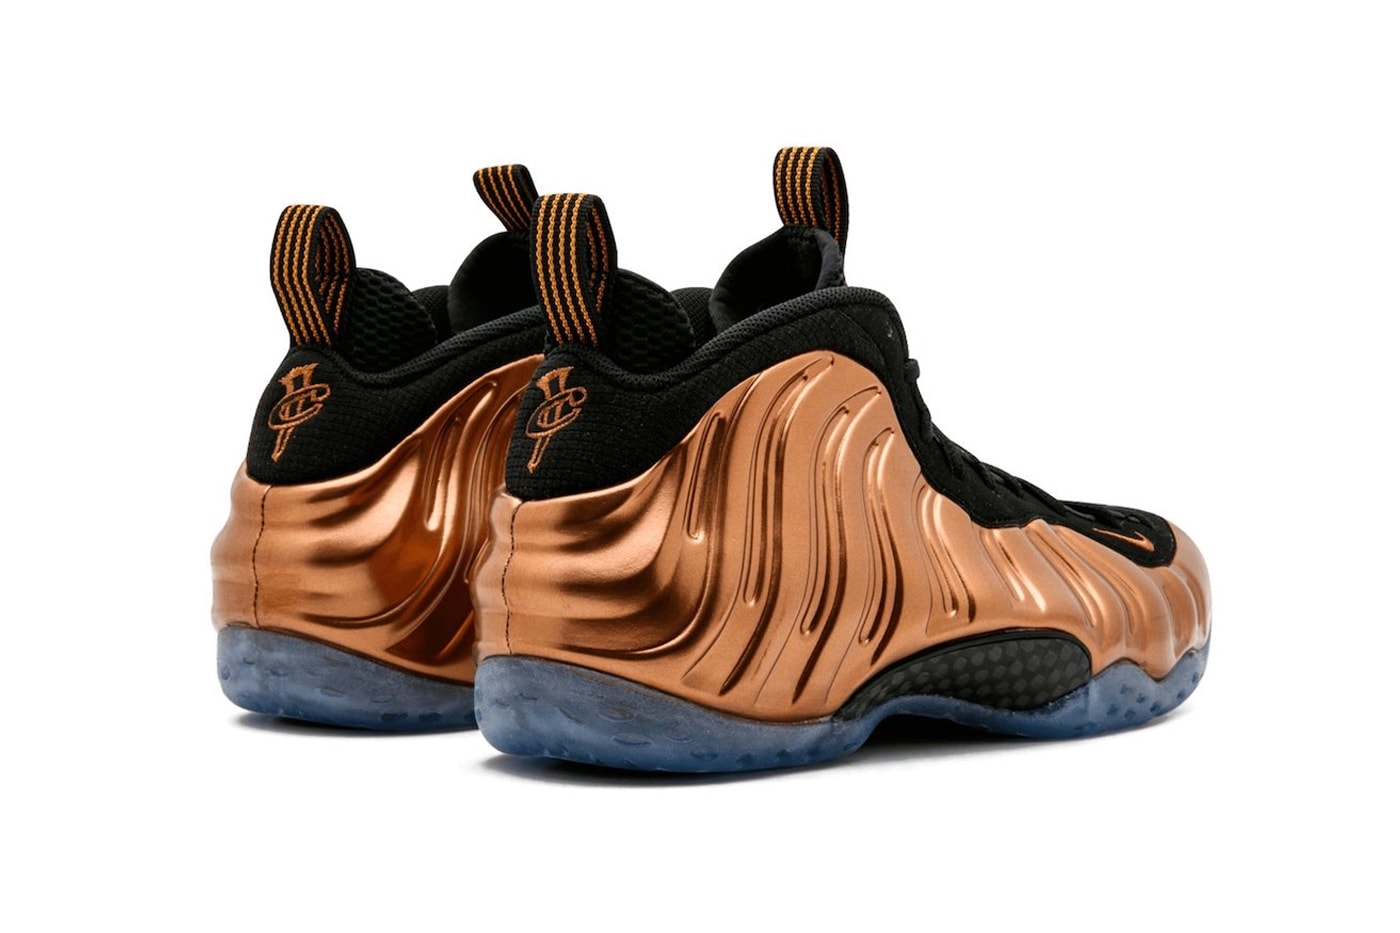 Nike Air Foamposite One "Metallic Copper" Is Set To Return Later This Year FZ9902-001 black metallic copper-off noir